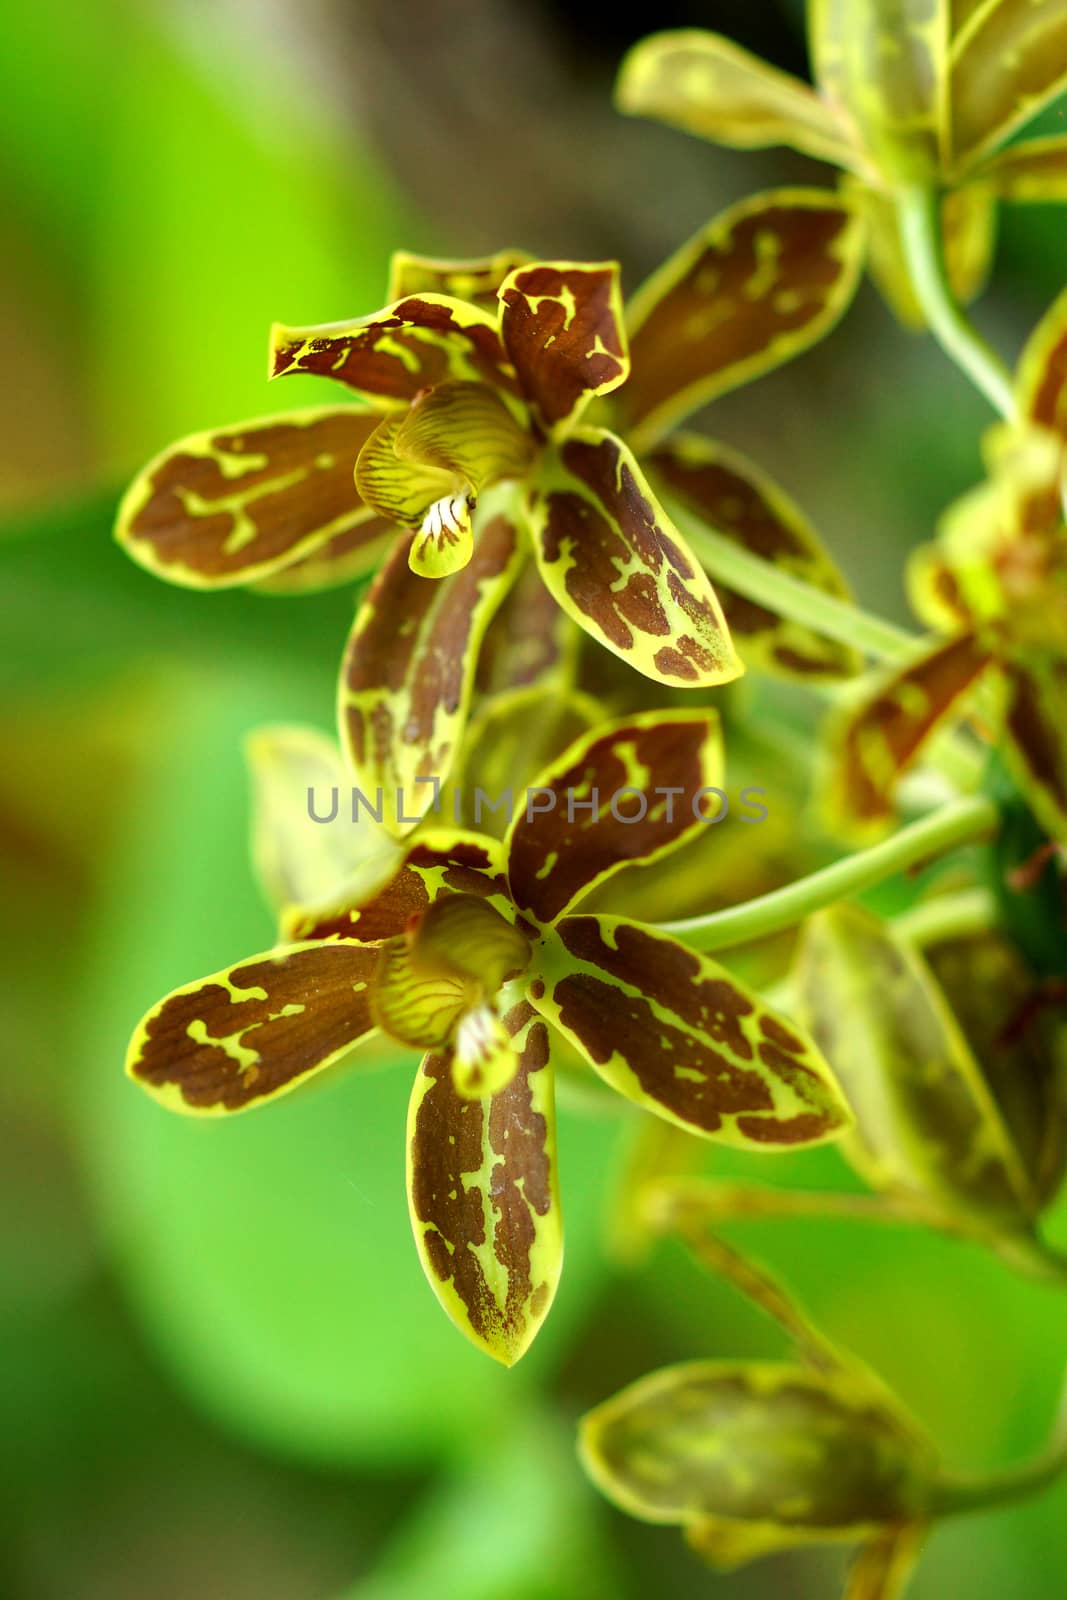 Green and yellow orchids (grammatophyllum orchid) by Noppharat_th